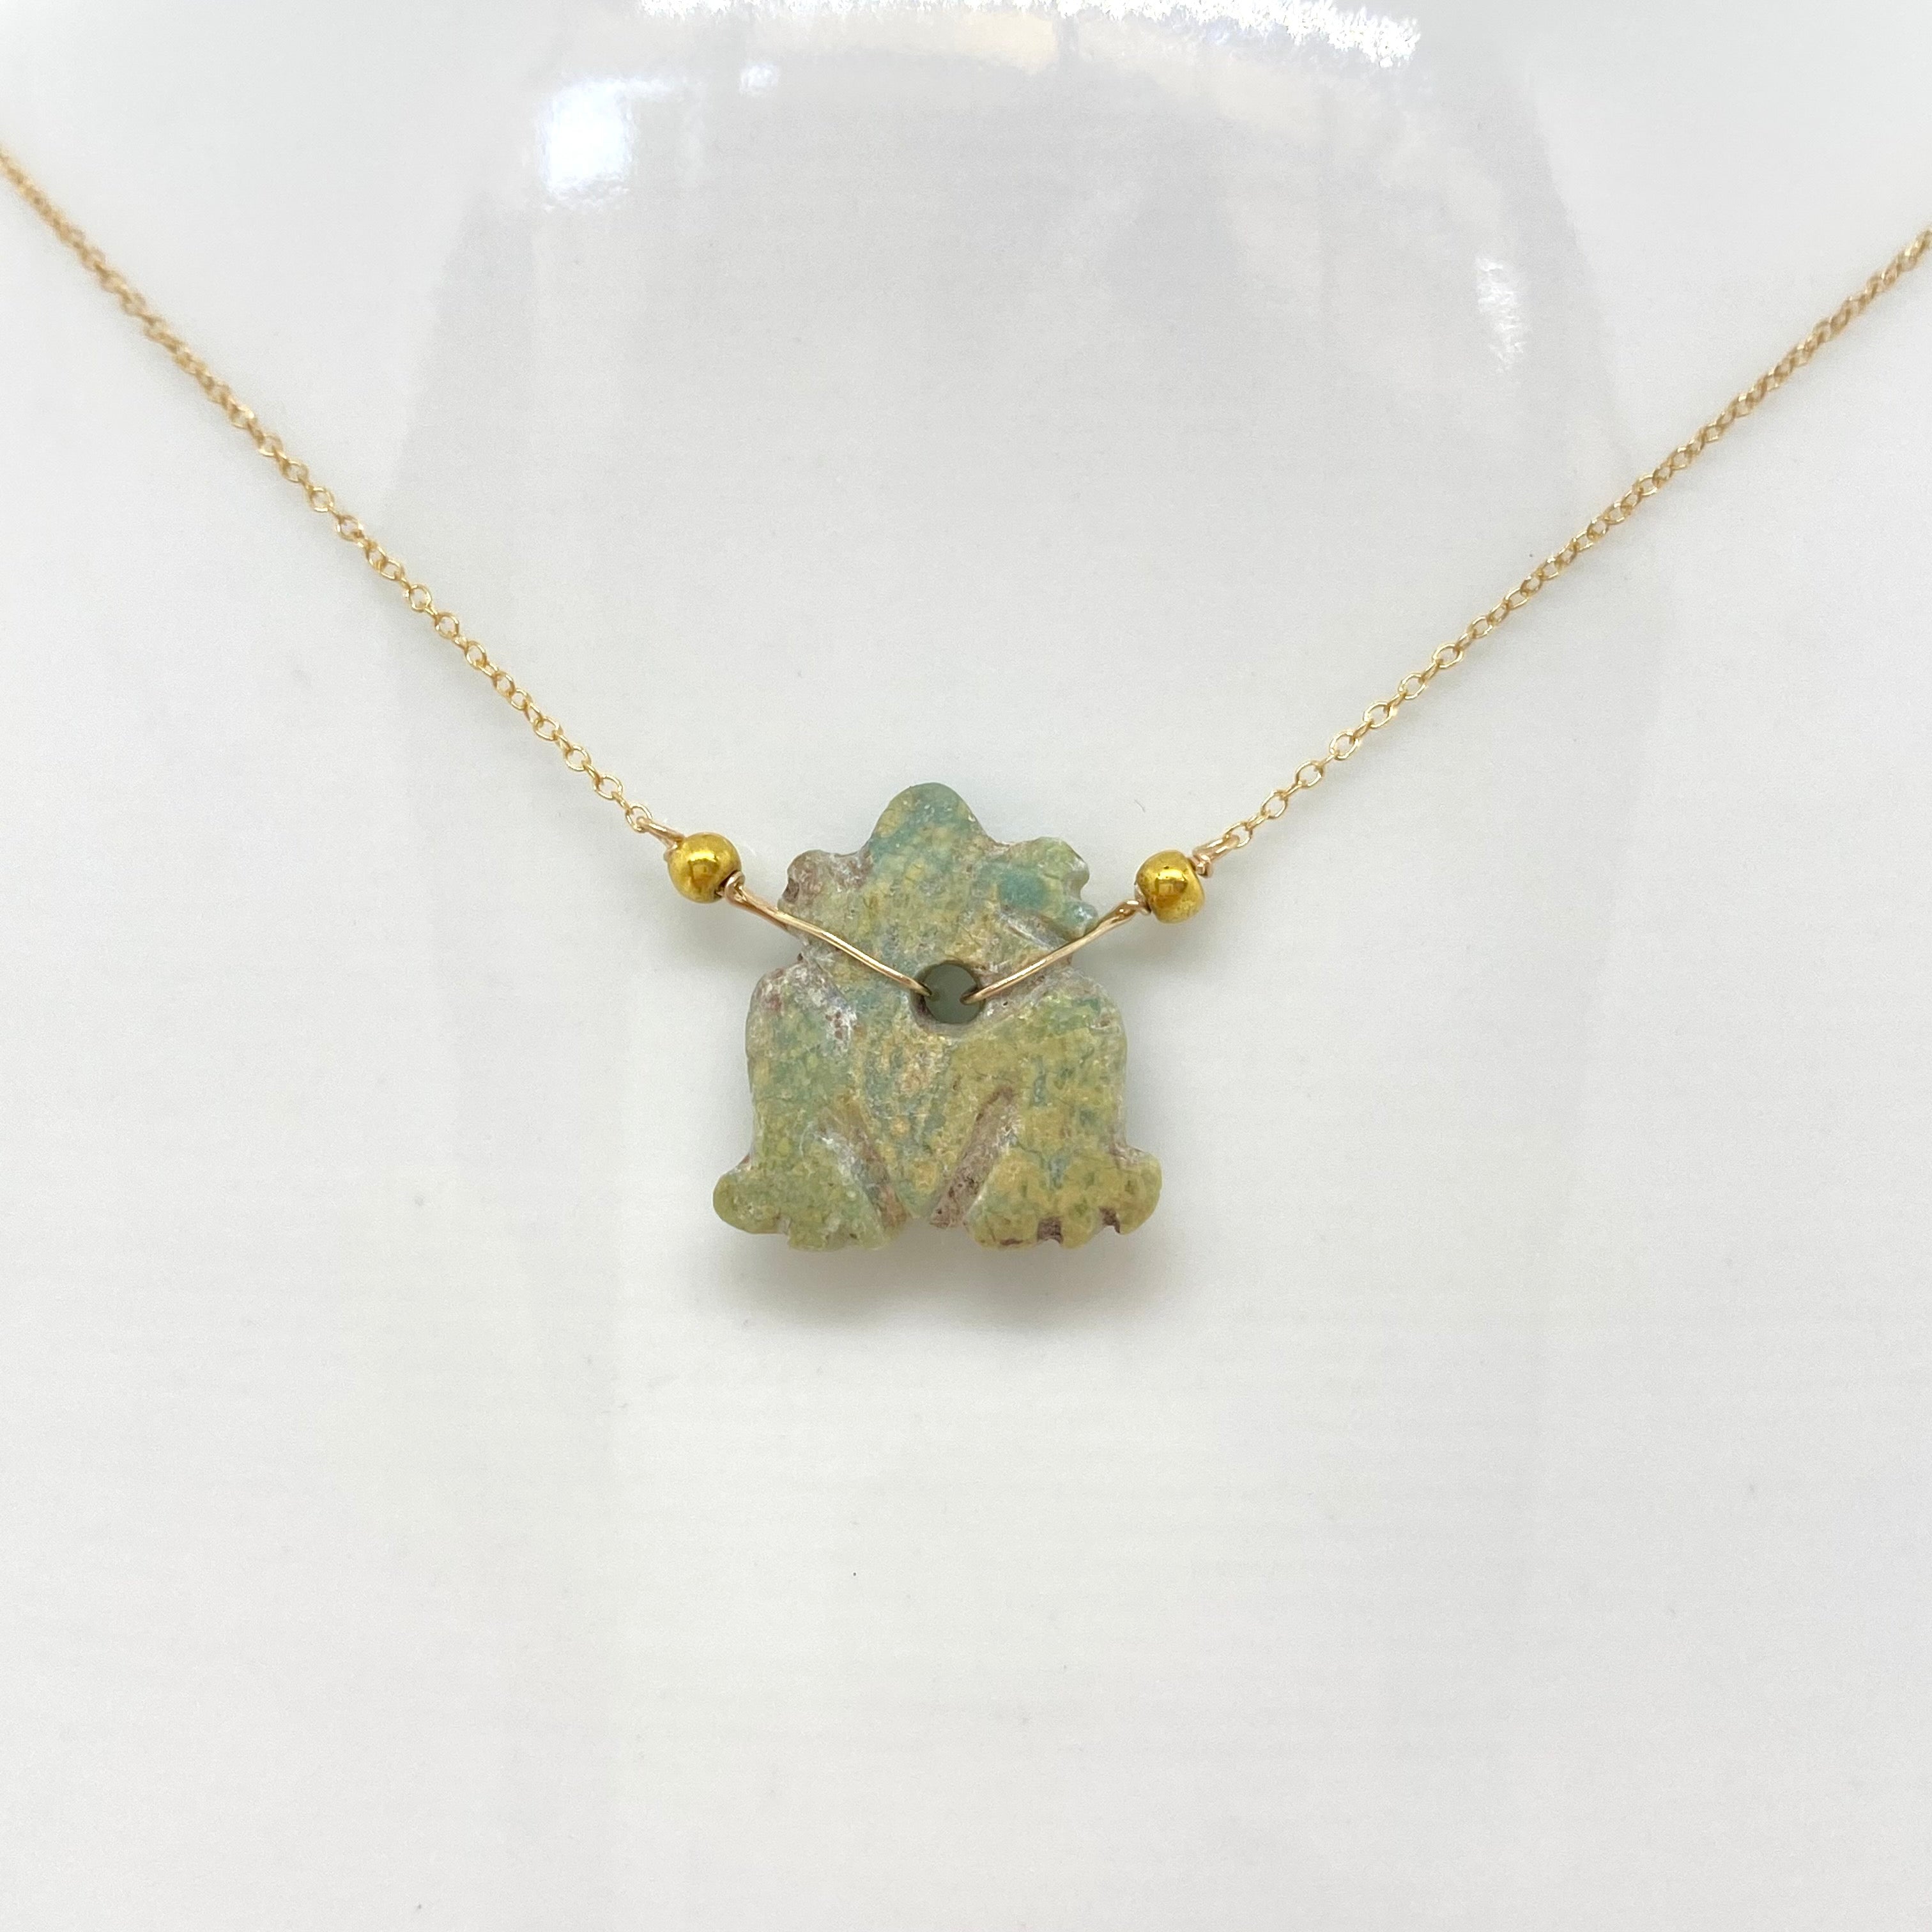 14k Gold Chain Necklace w/ Pre-Columbian Jade Frog Charm & 18k Gold Nuggets